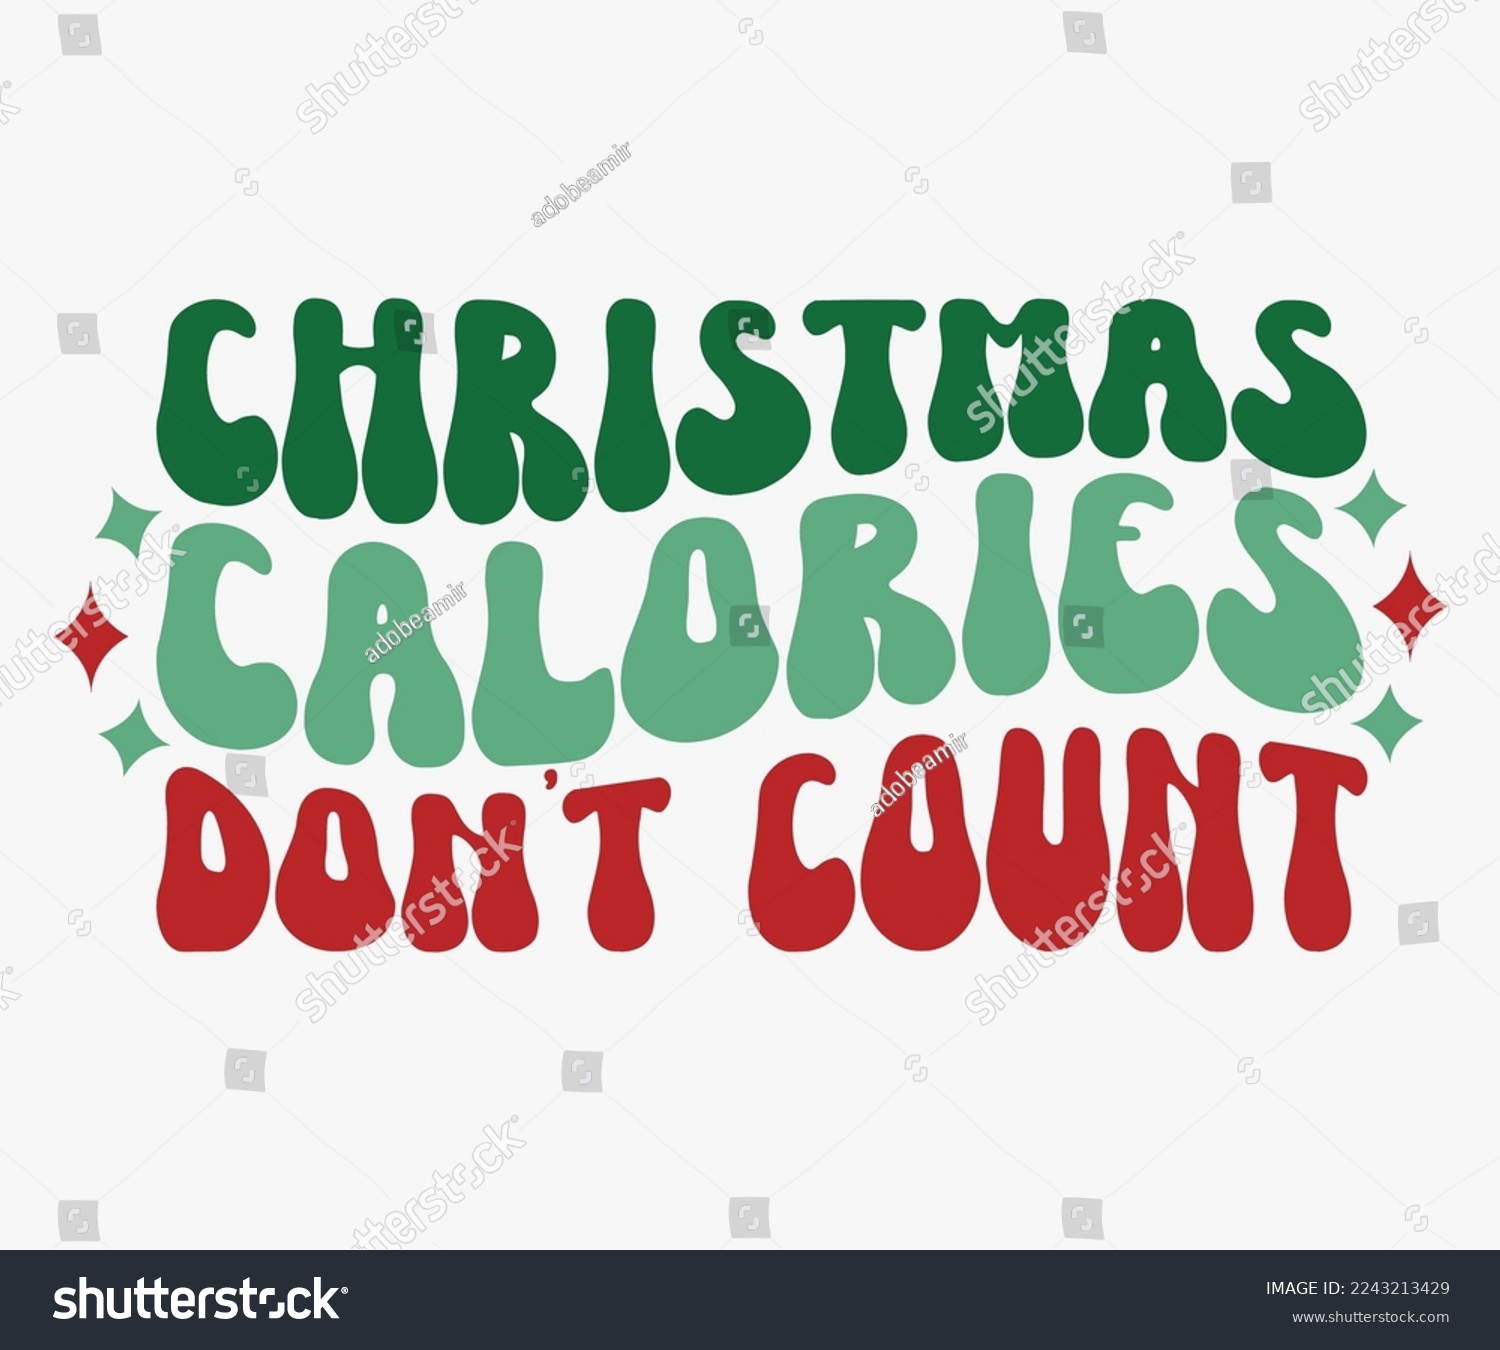 SVG of Christmas Calories Don't Count Saying SVG, Retro Christmas T-shirt, Funny Christmas Quotes, Merry Christmas Saying SVG, Holiday Saying SVG, New Year Quotes, Winter Quotes SVG svg